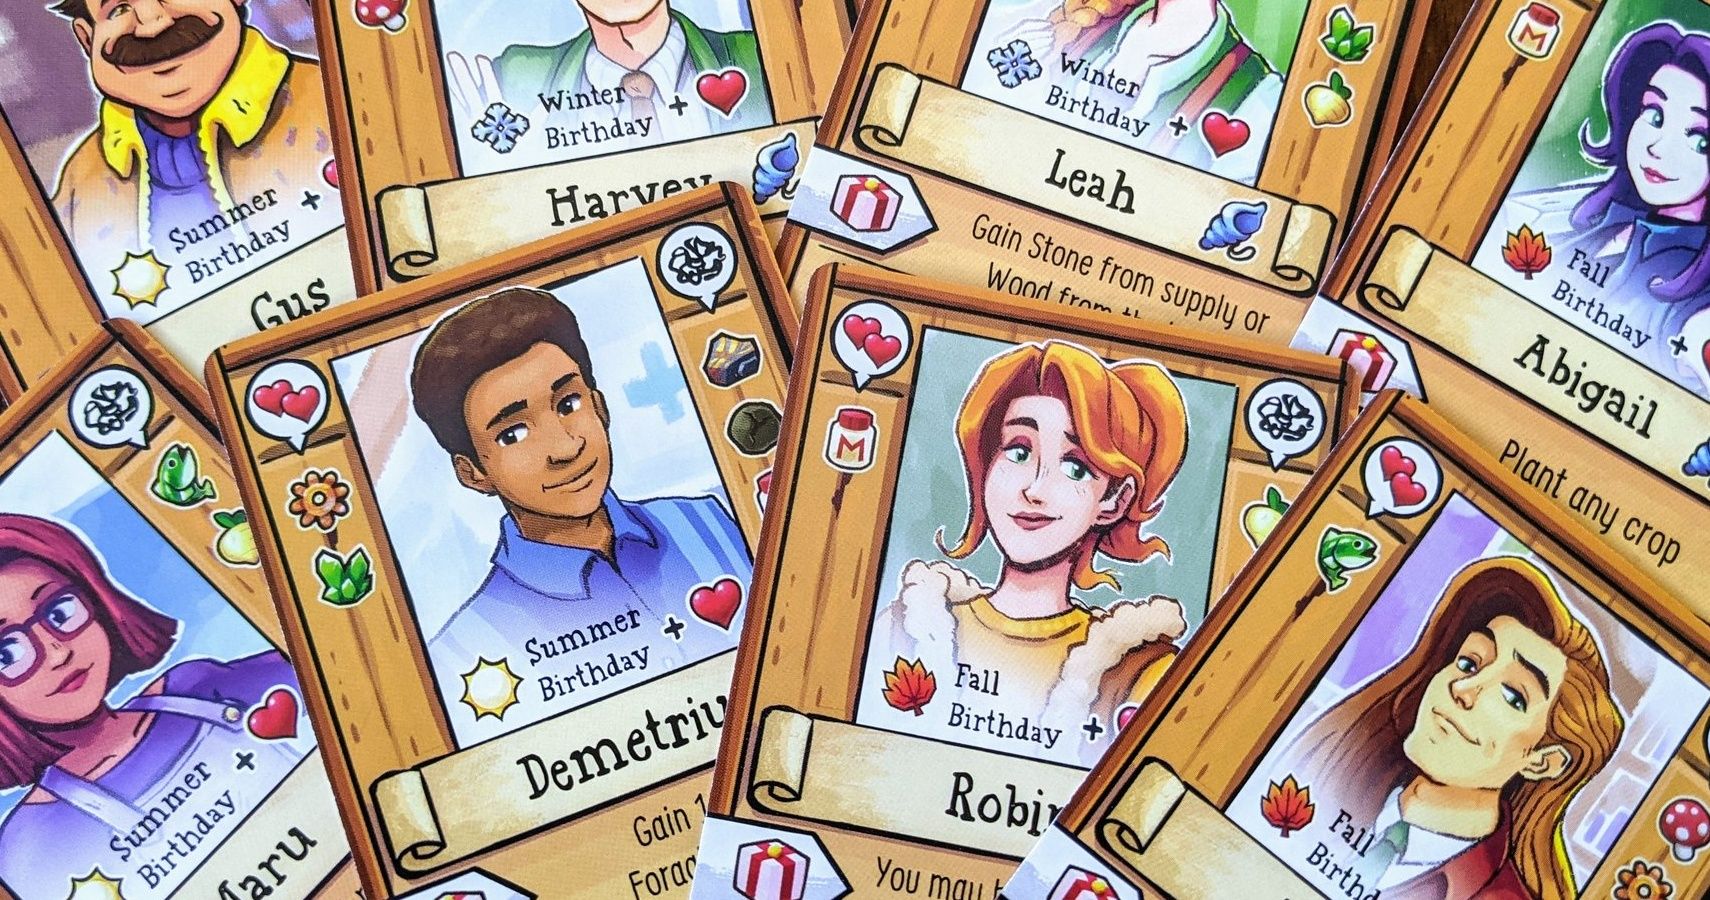 Stardew Valley board game promo image